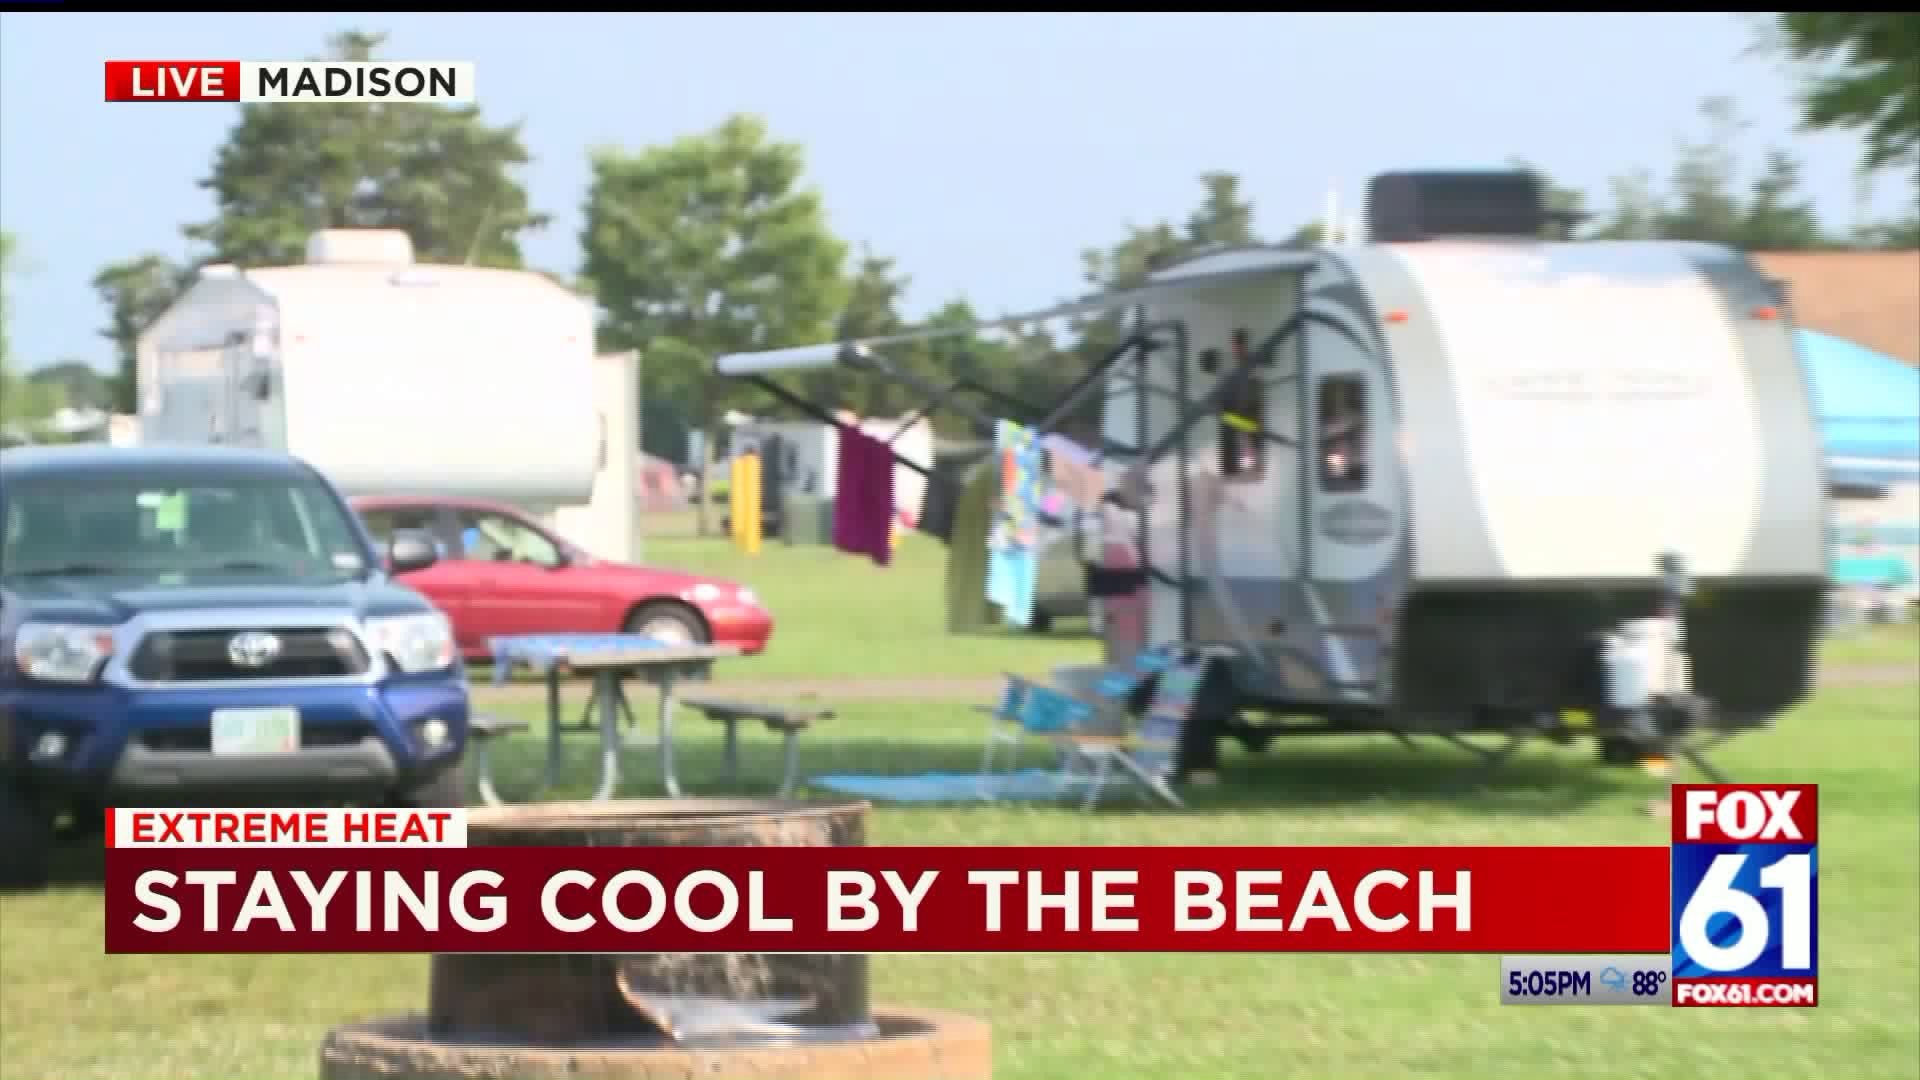 Campers staying cool by the beach